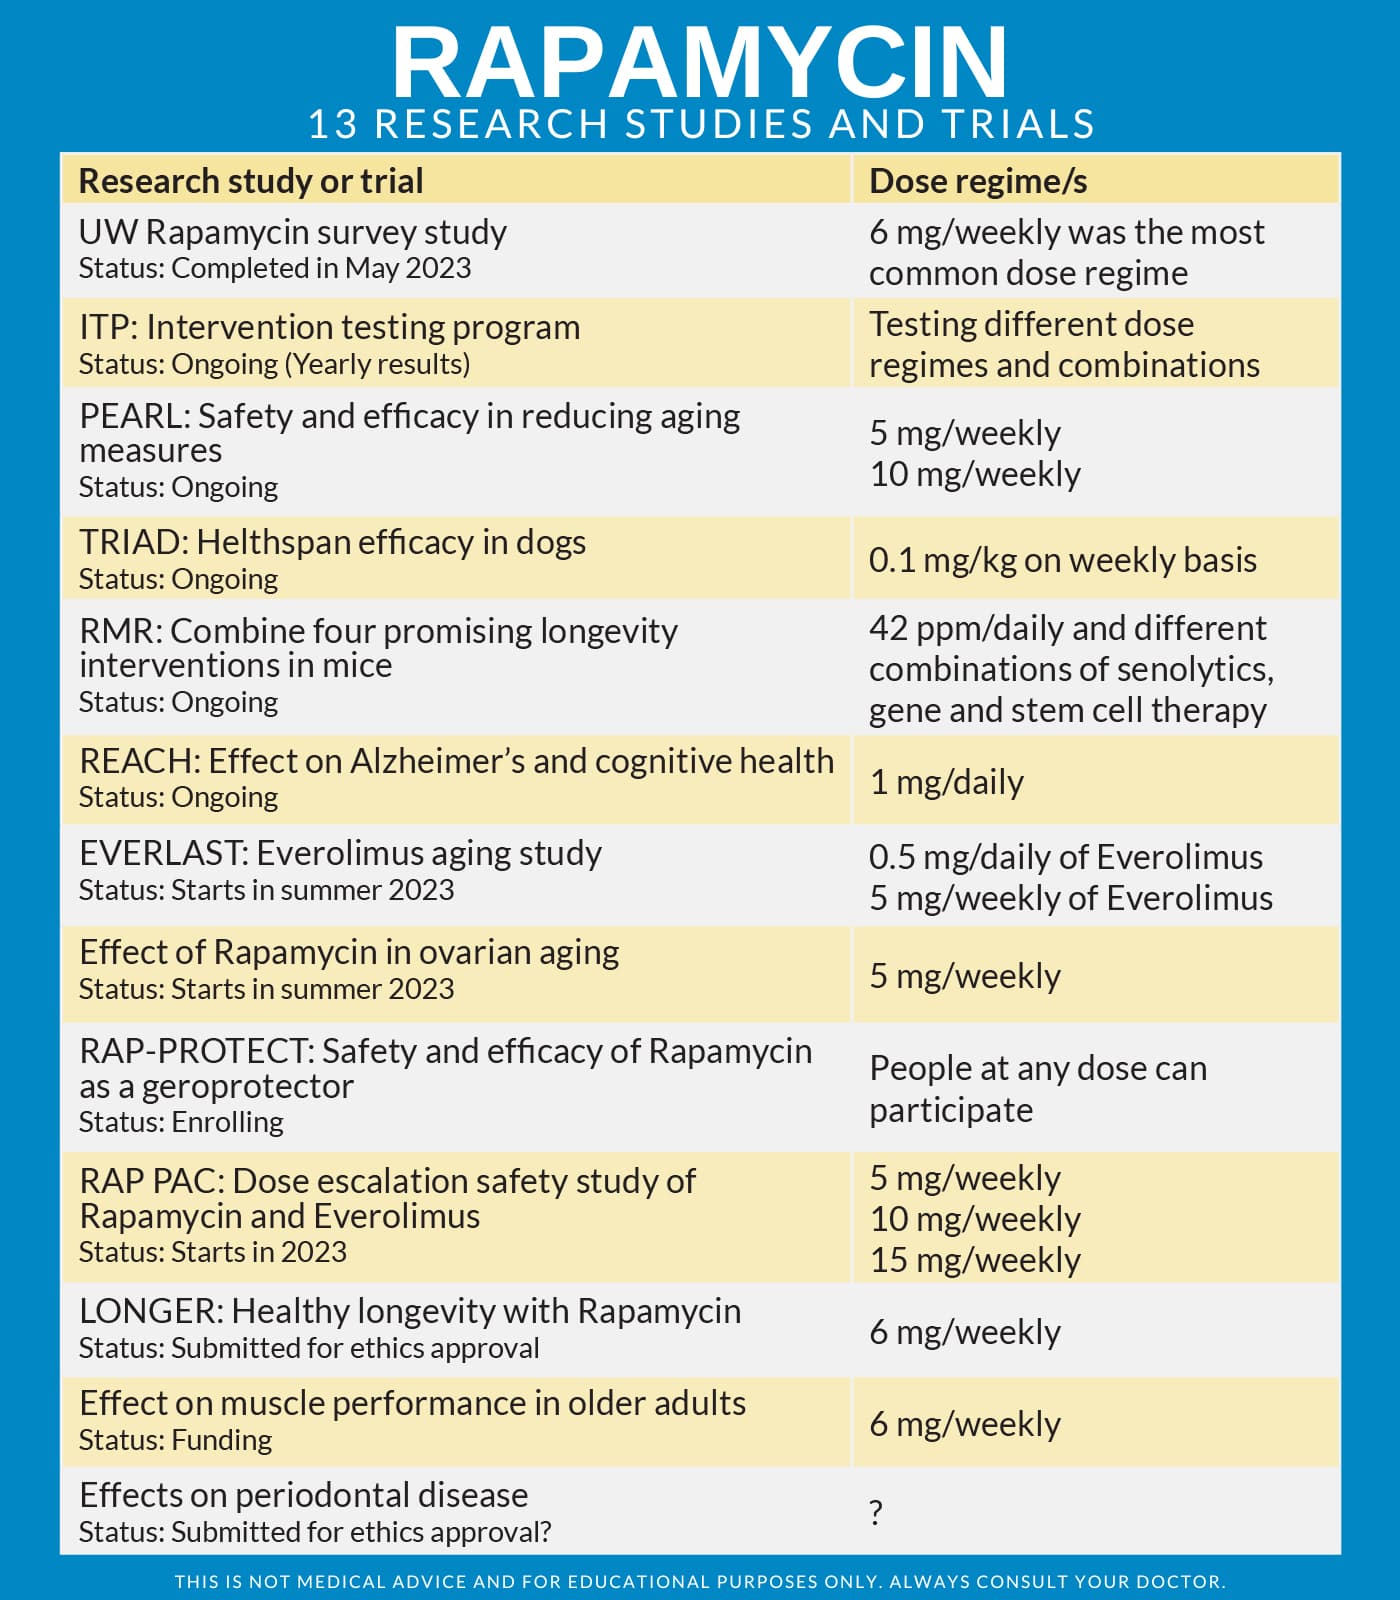 Research Studies and TrialsV5